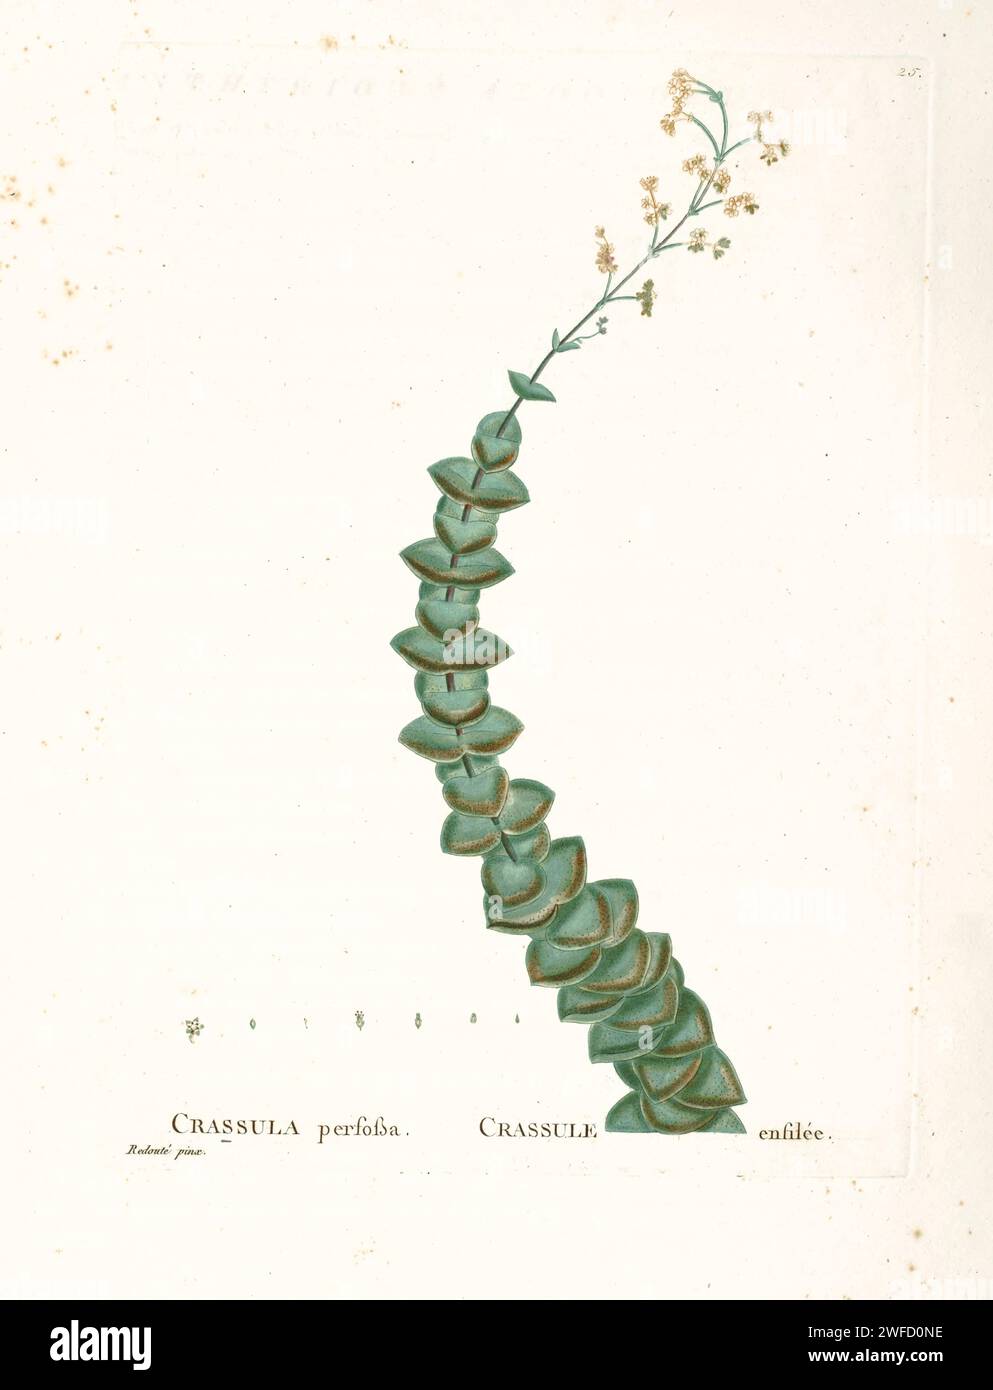 Crassula perfossa Lam. from History of Succulent Plants [Plantarum historia succulentarum / Histoire des plantes grasses] painted by Pierre-Joseph Redouté and described by Augustin Pyramus de Candolle Crassula perforata is a succulent plant native to the Cape Provinces and KwaZulu-Natal in South Africa. Stock Photo